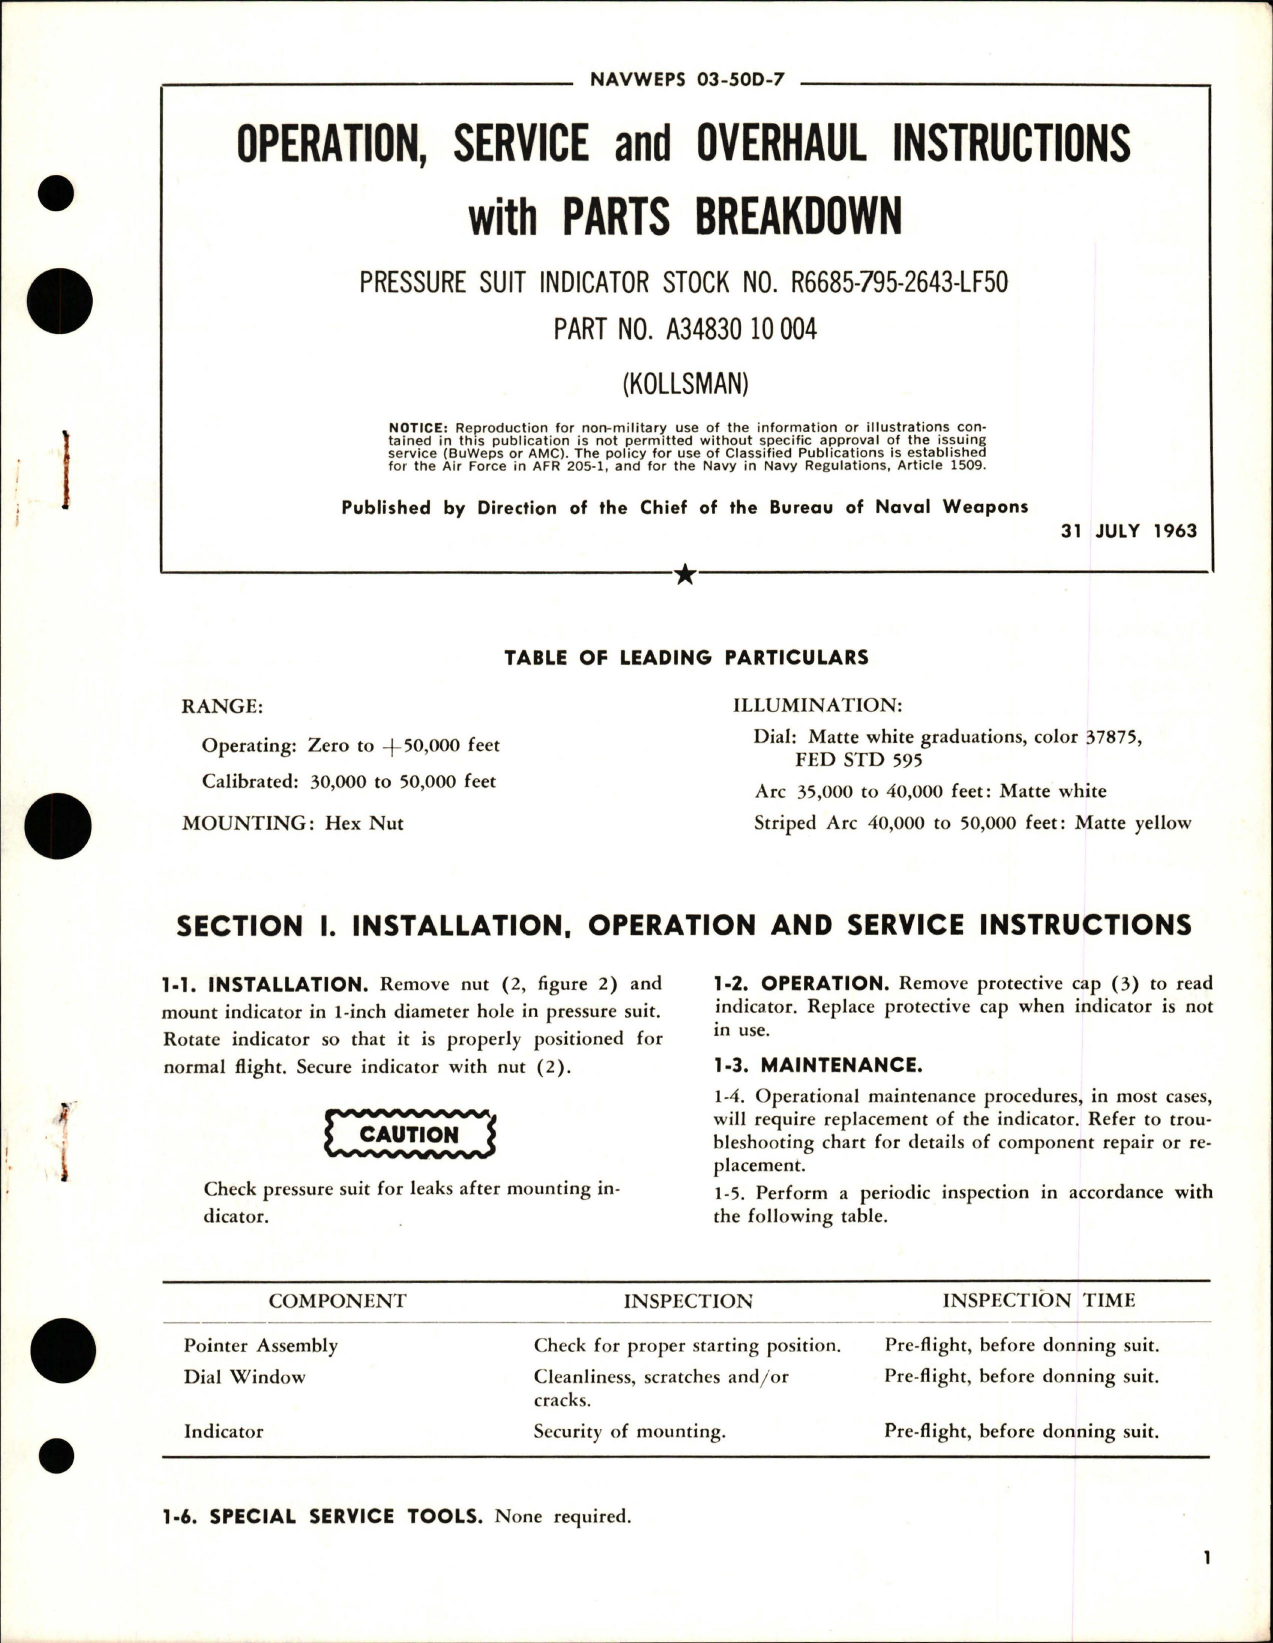 Sample page 1 from AirCorps Library document: Operation, Service and Overhaul Instructions with Parts Breakdown for Pressure Suit Indicator - Part A34830 10 004 